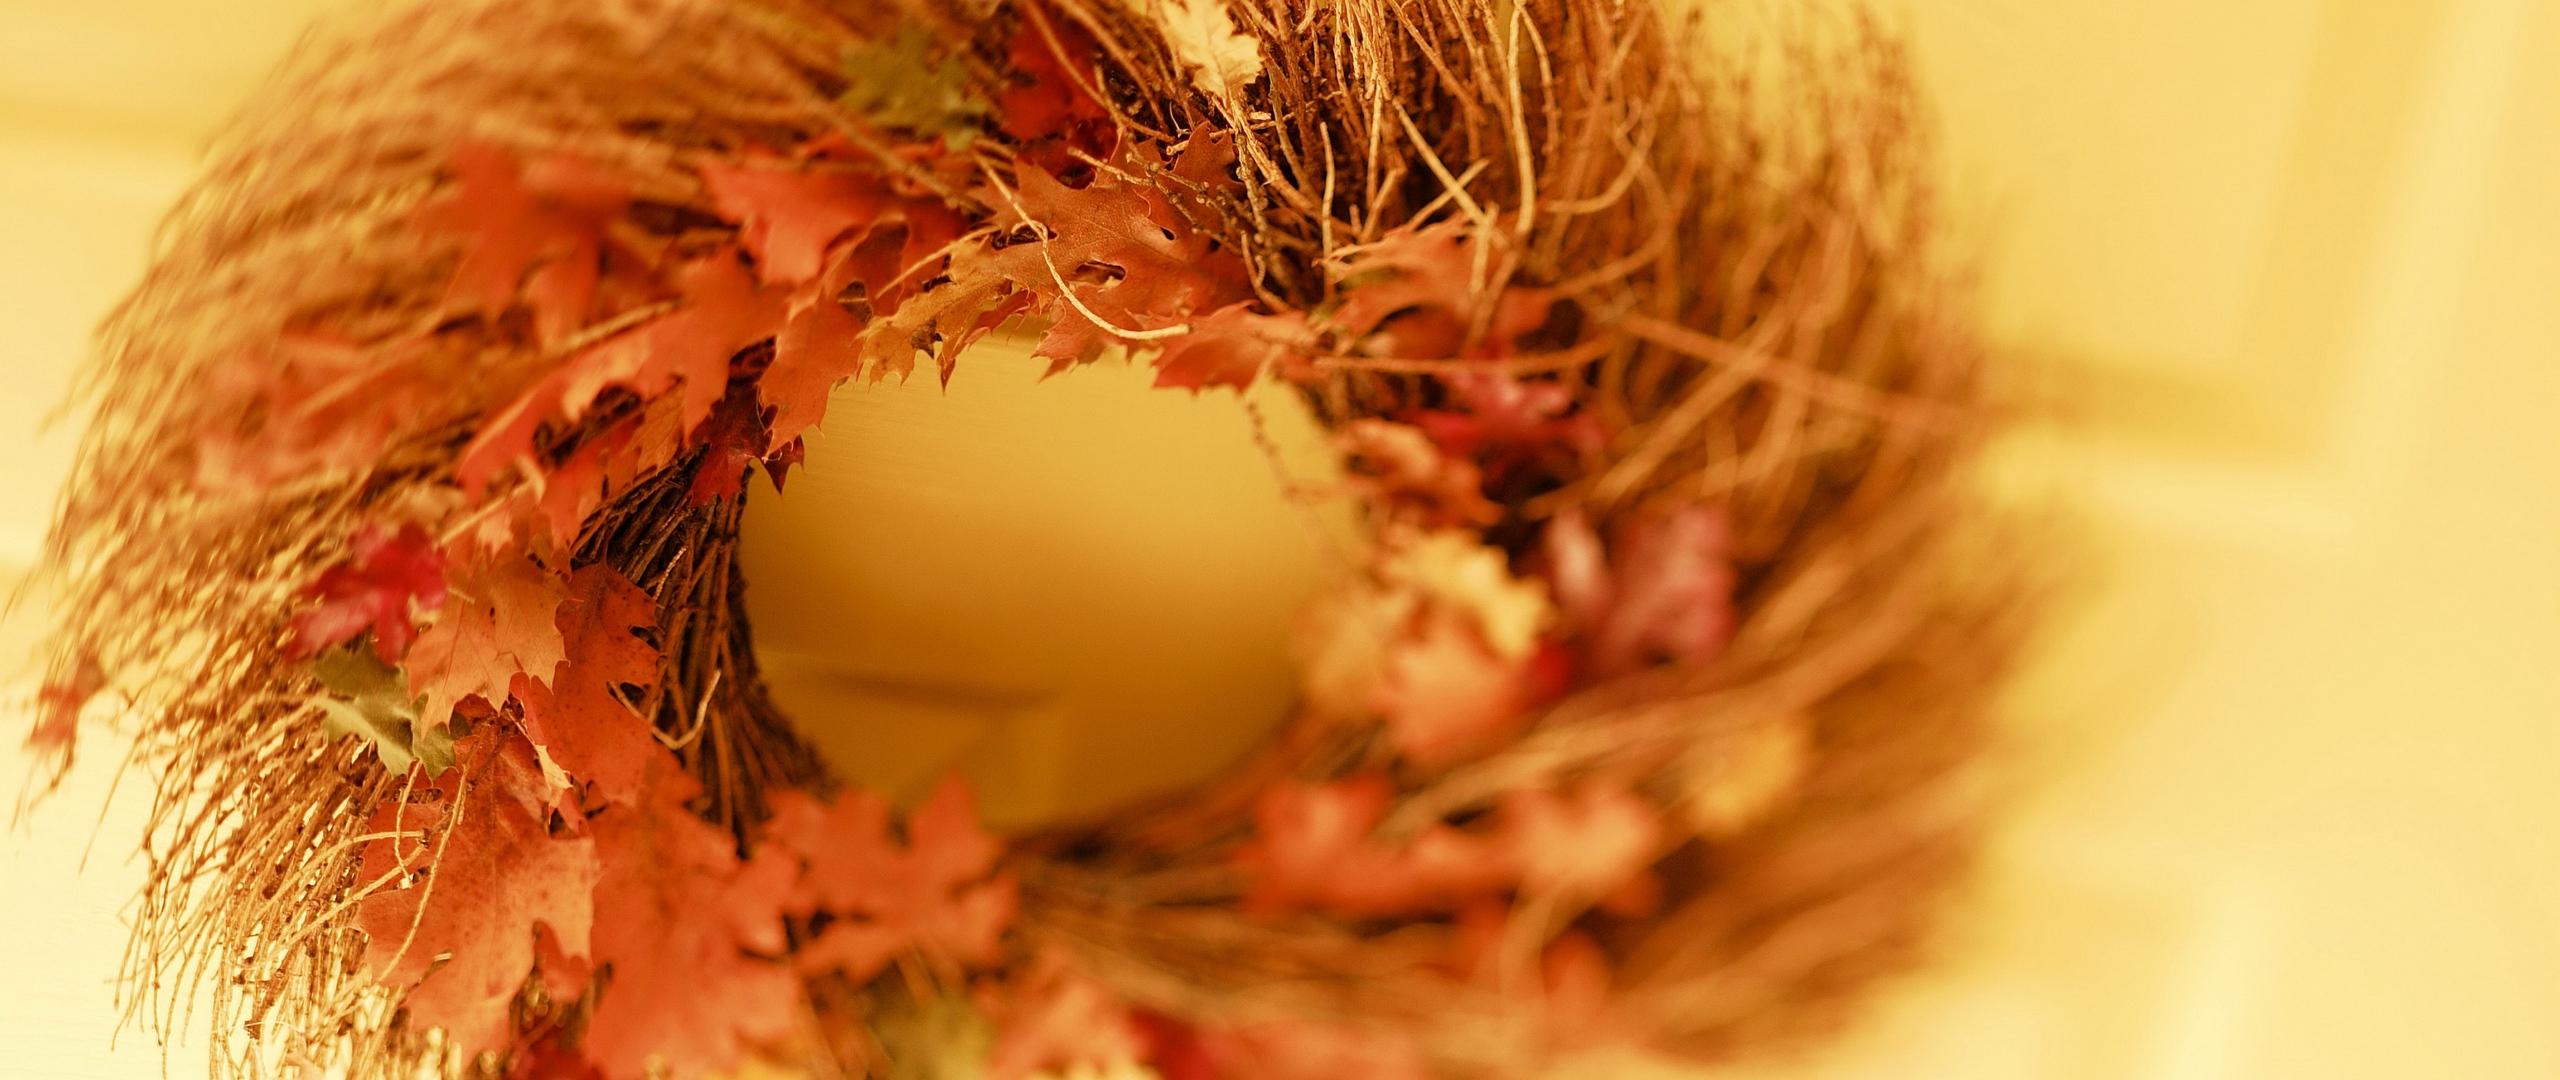 Download wallpaper 2560x1080 wreath, fall, leaves dual wide